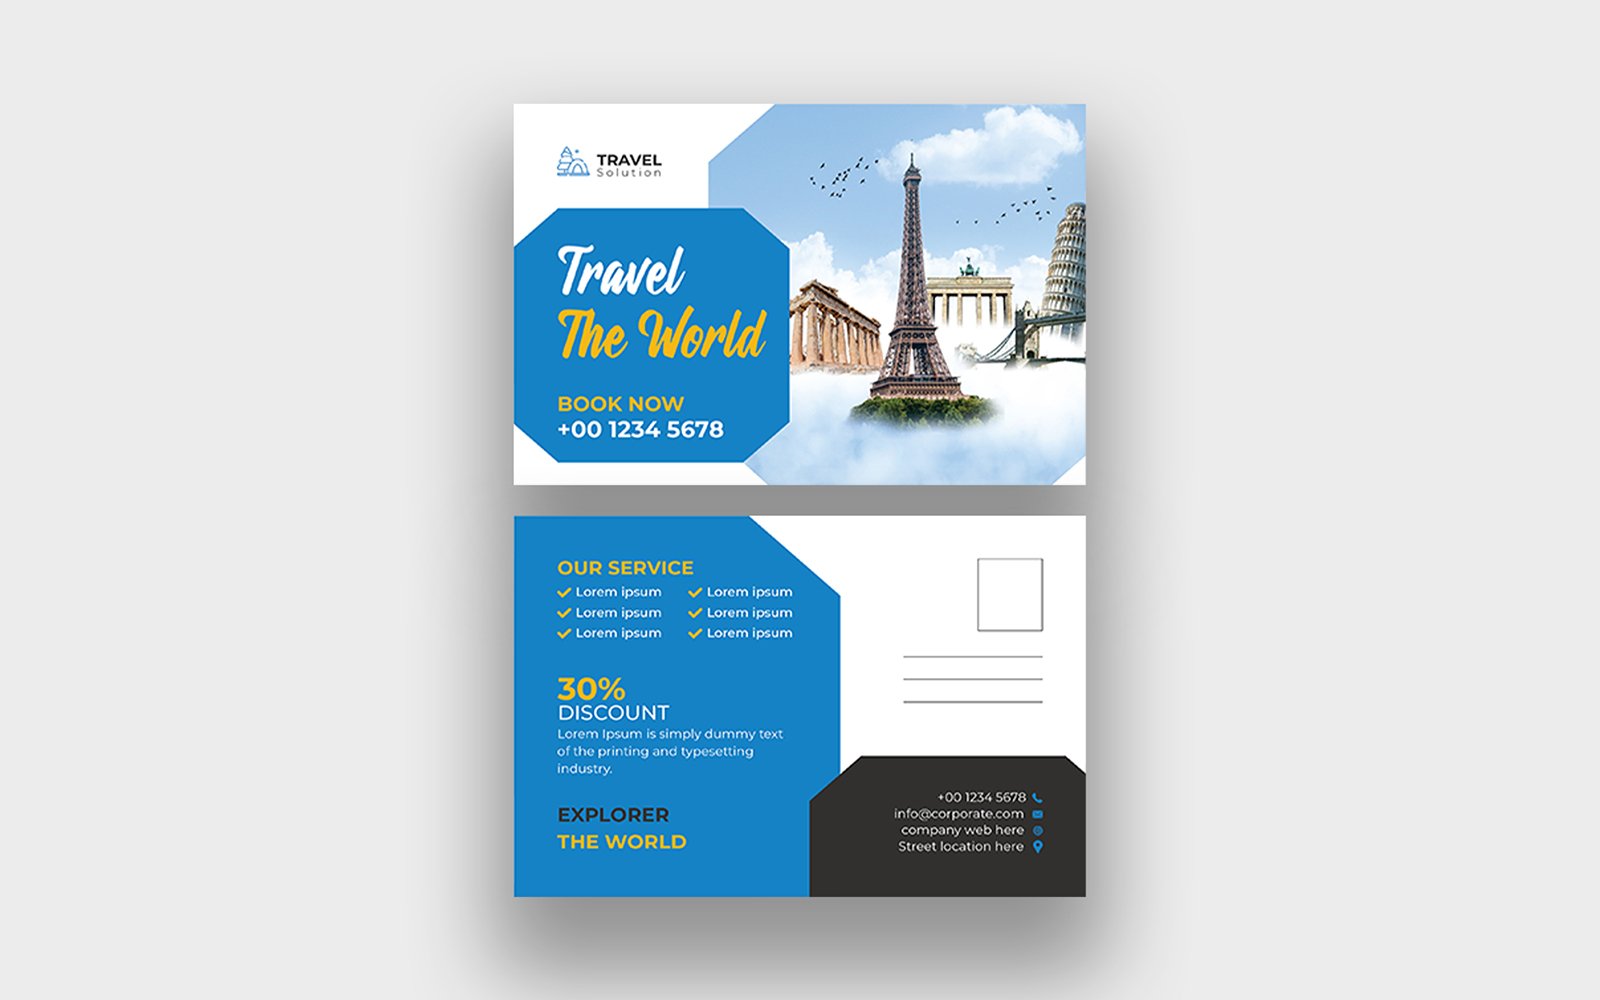 Template #298346 Travel Travel Webdesign Template - Logo template Preview